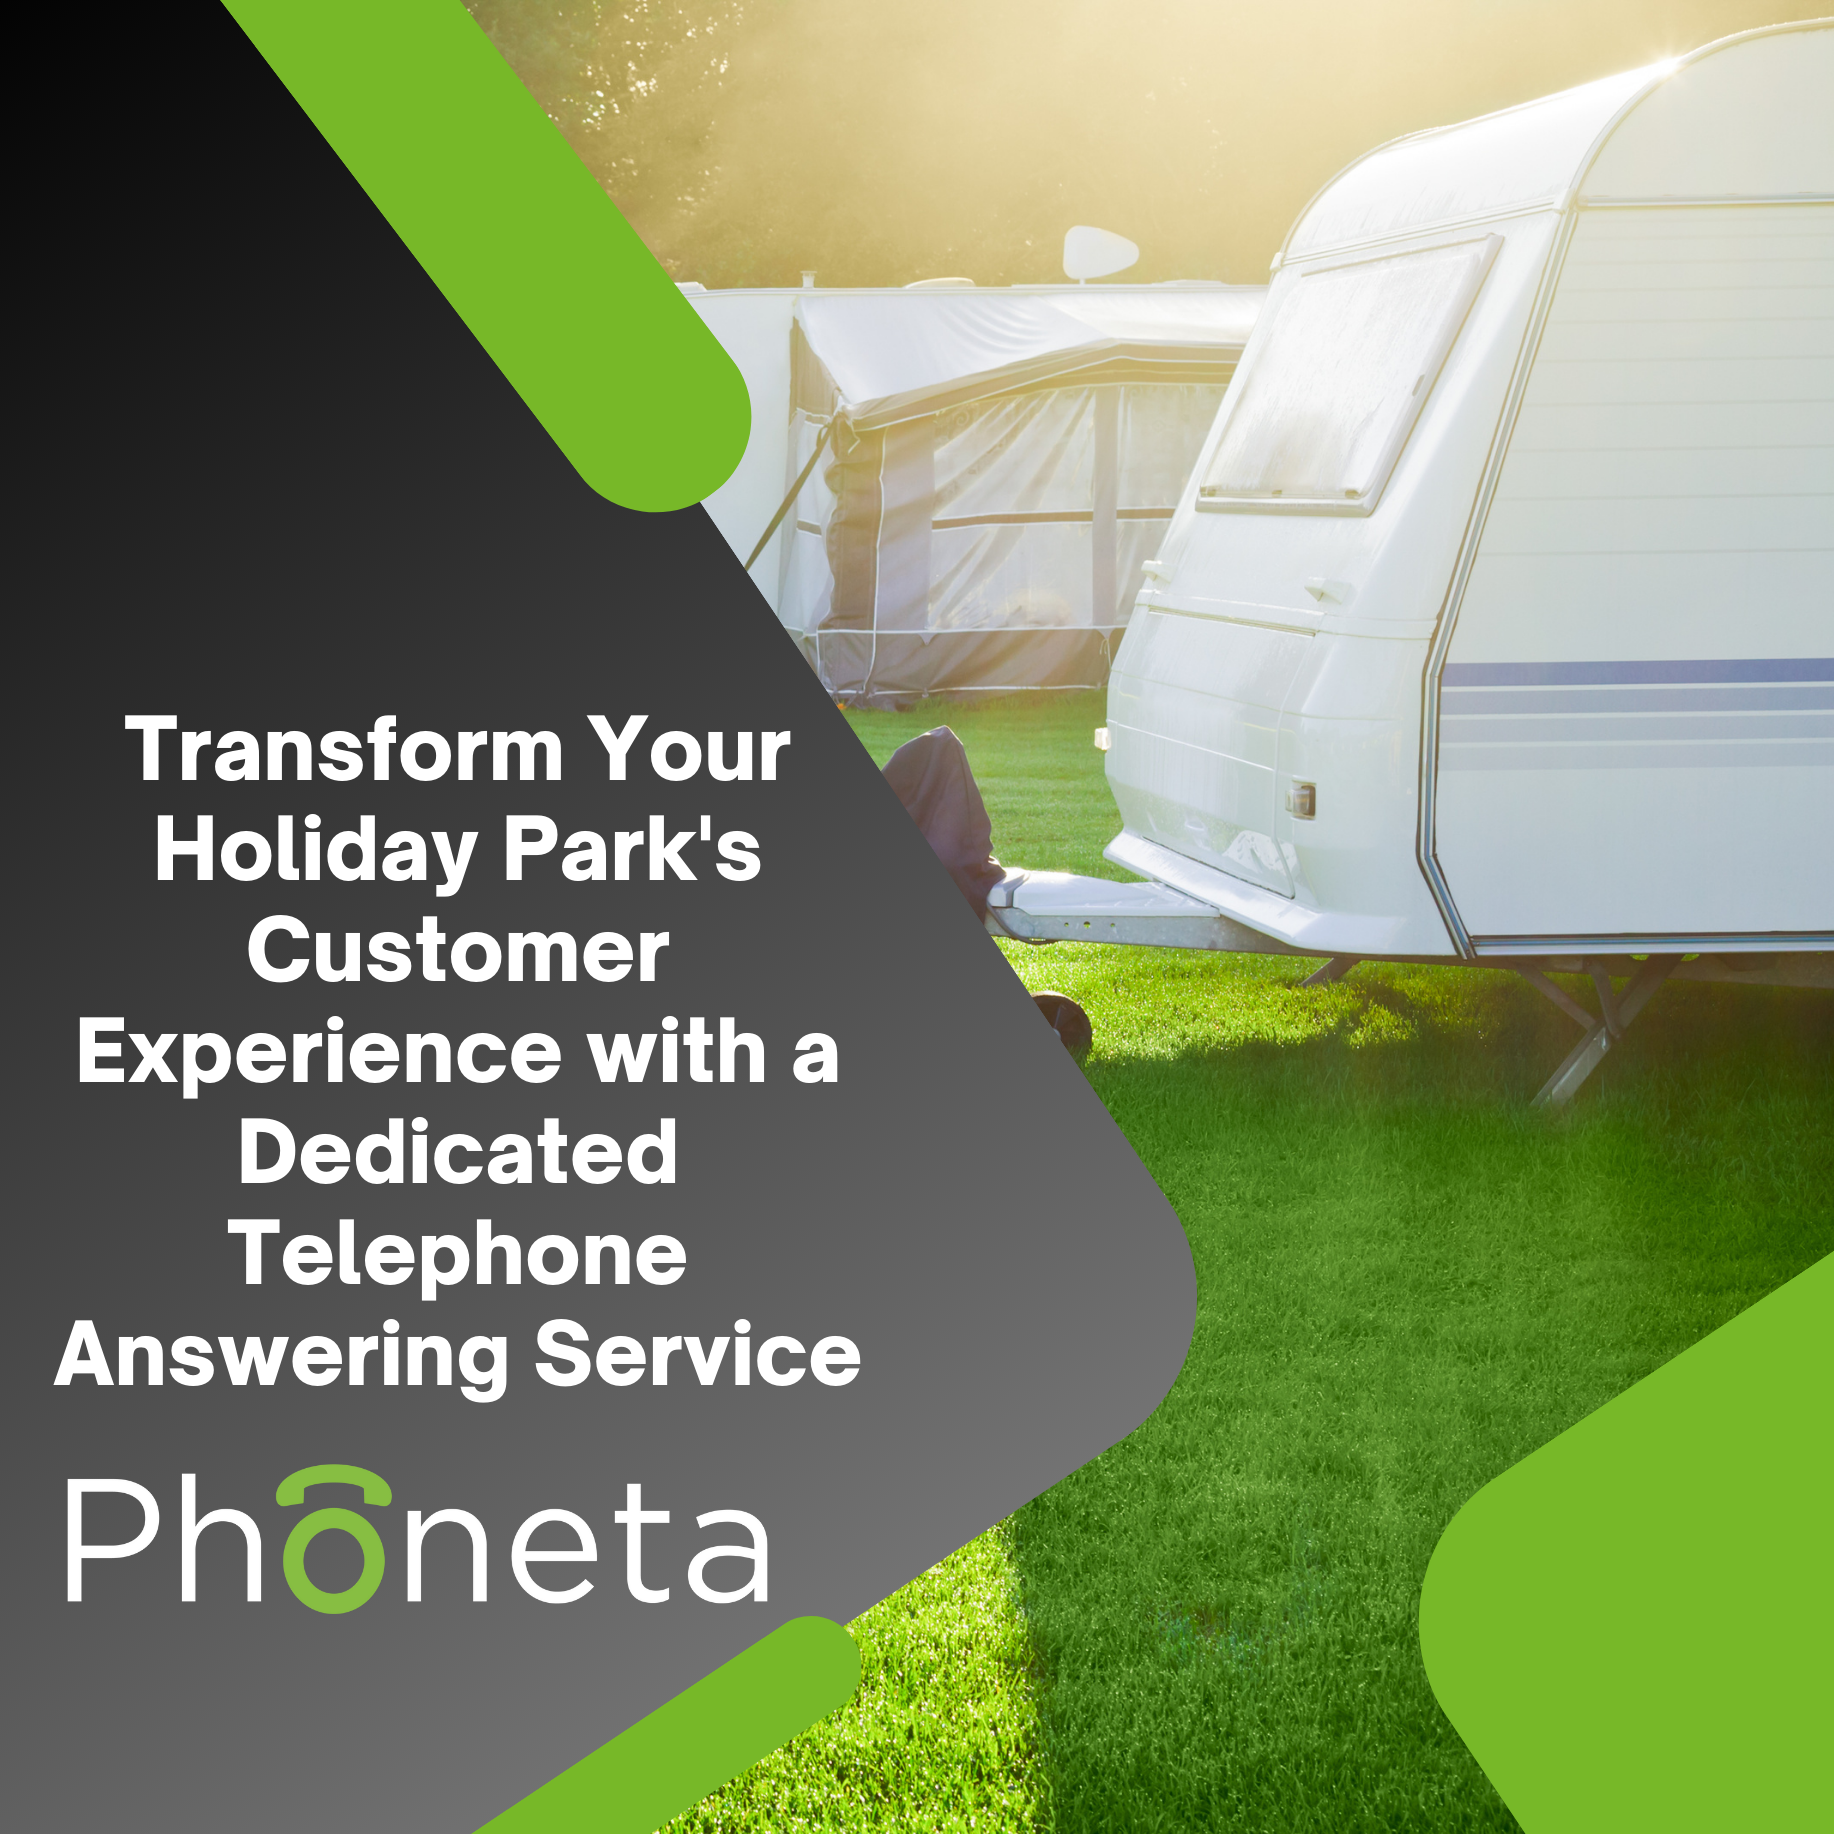 Transform Your Holiday Park's Customer Experience with a Dedicated Telephone Answering Service